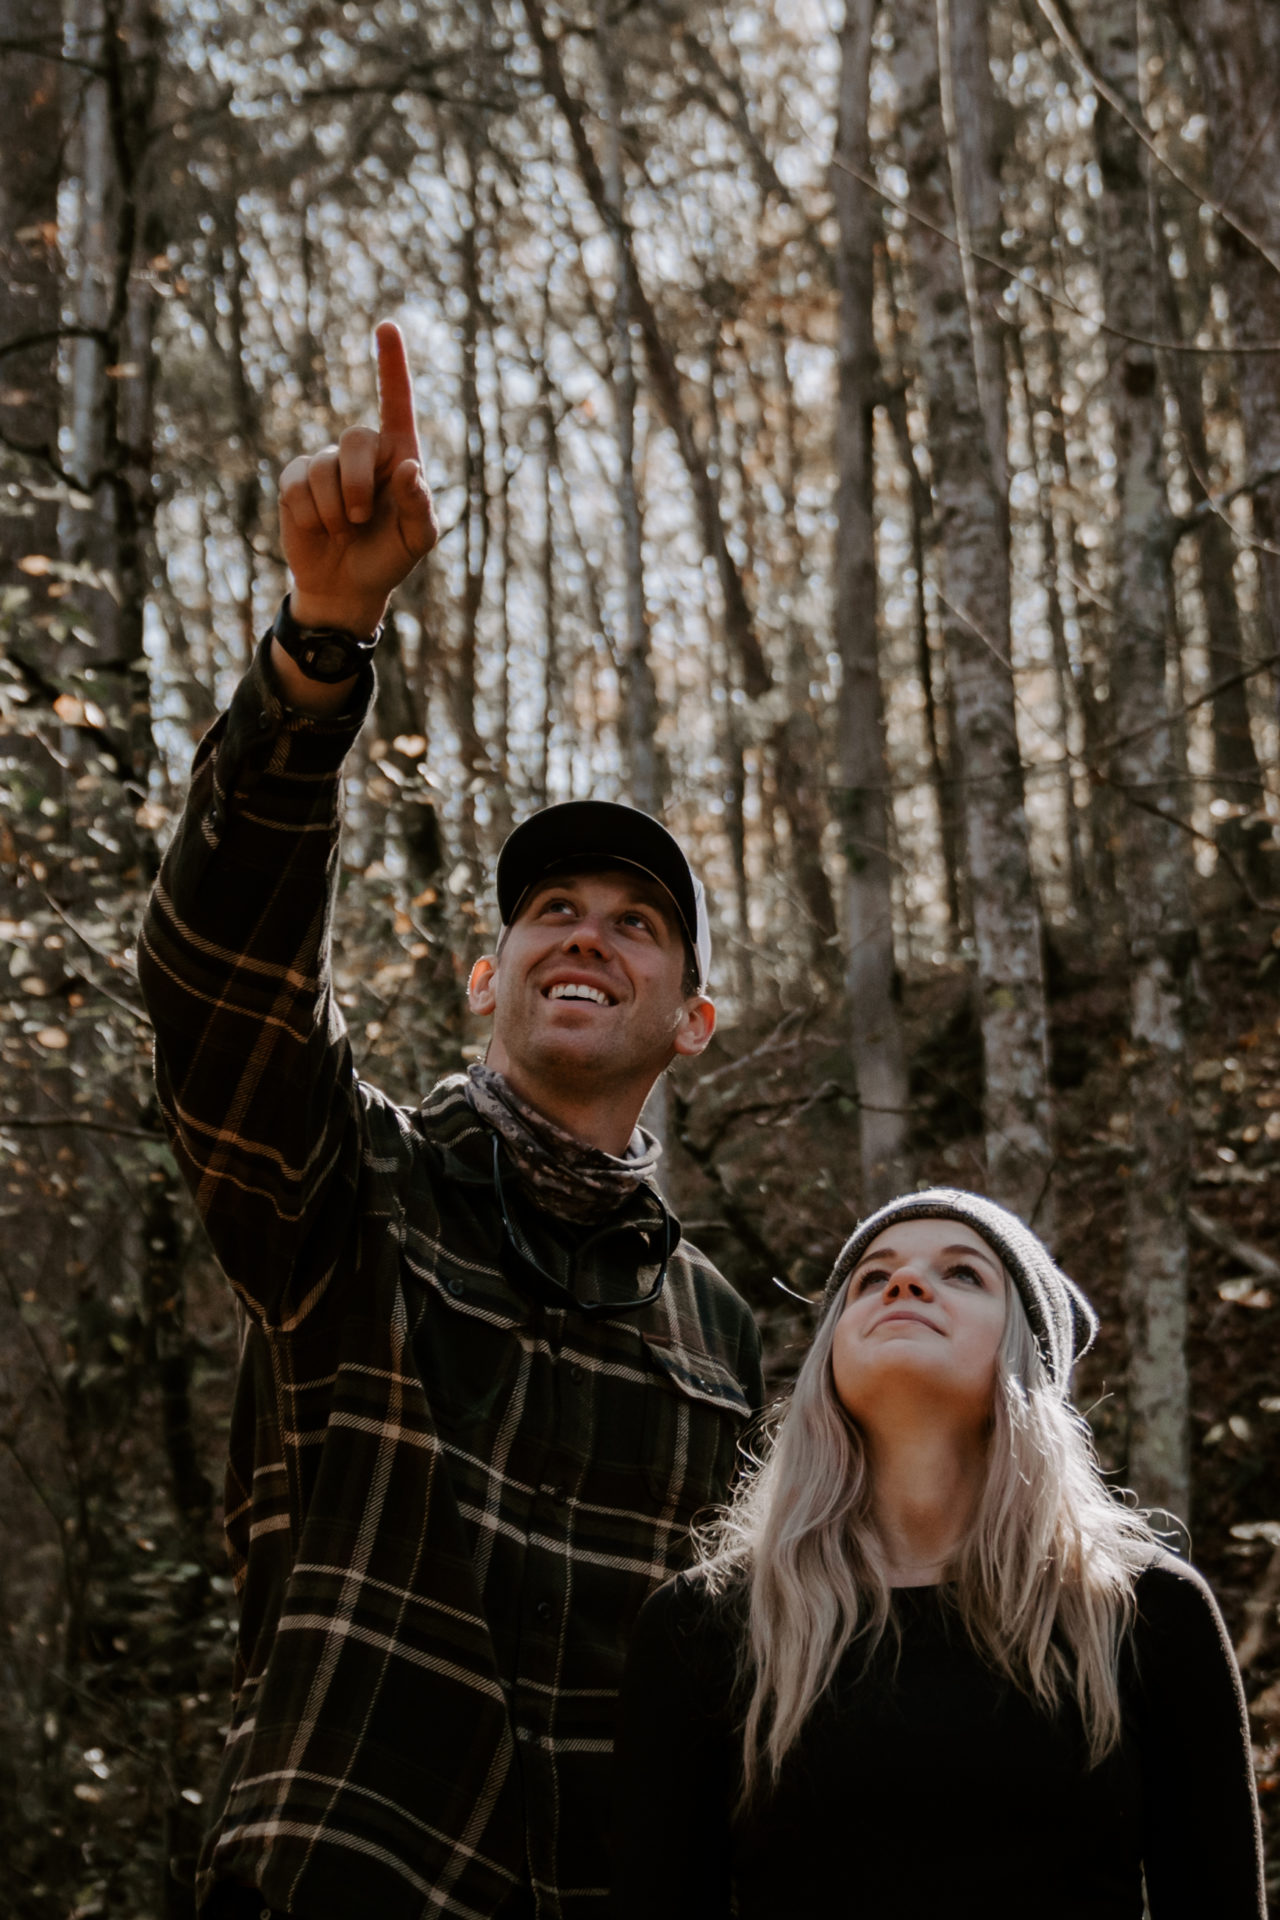 Lifestyle photography of a man and woman standing together in a wooded area and the man is pointing up at something.